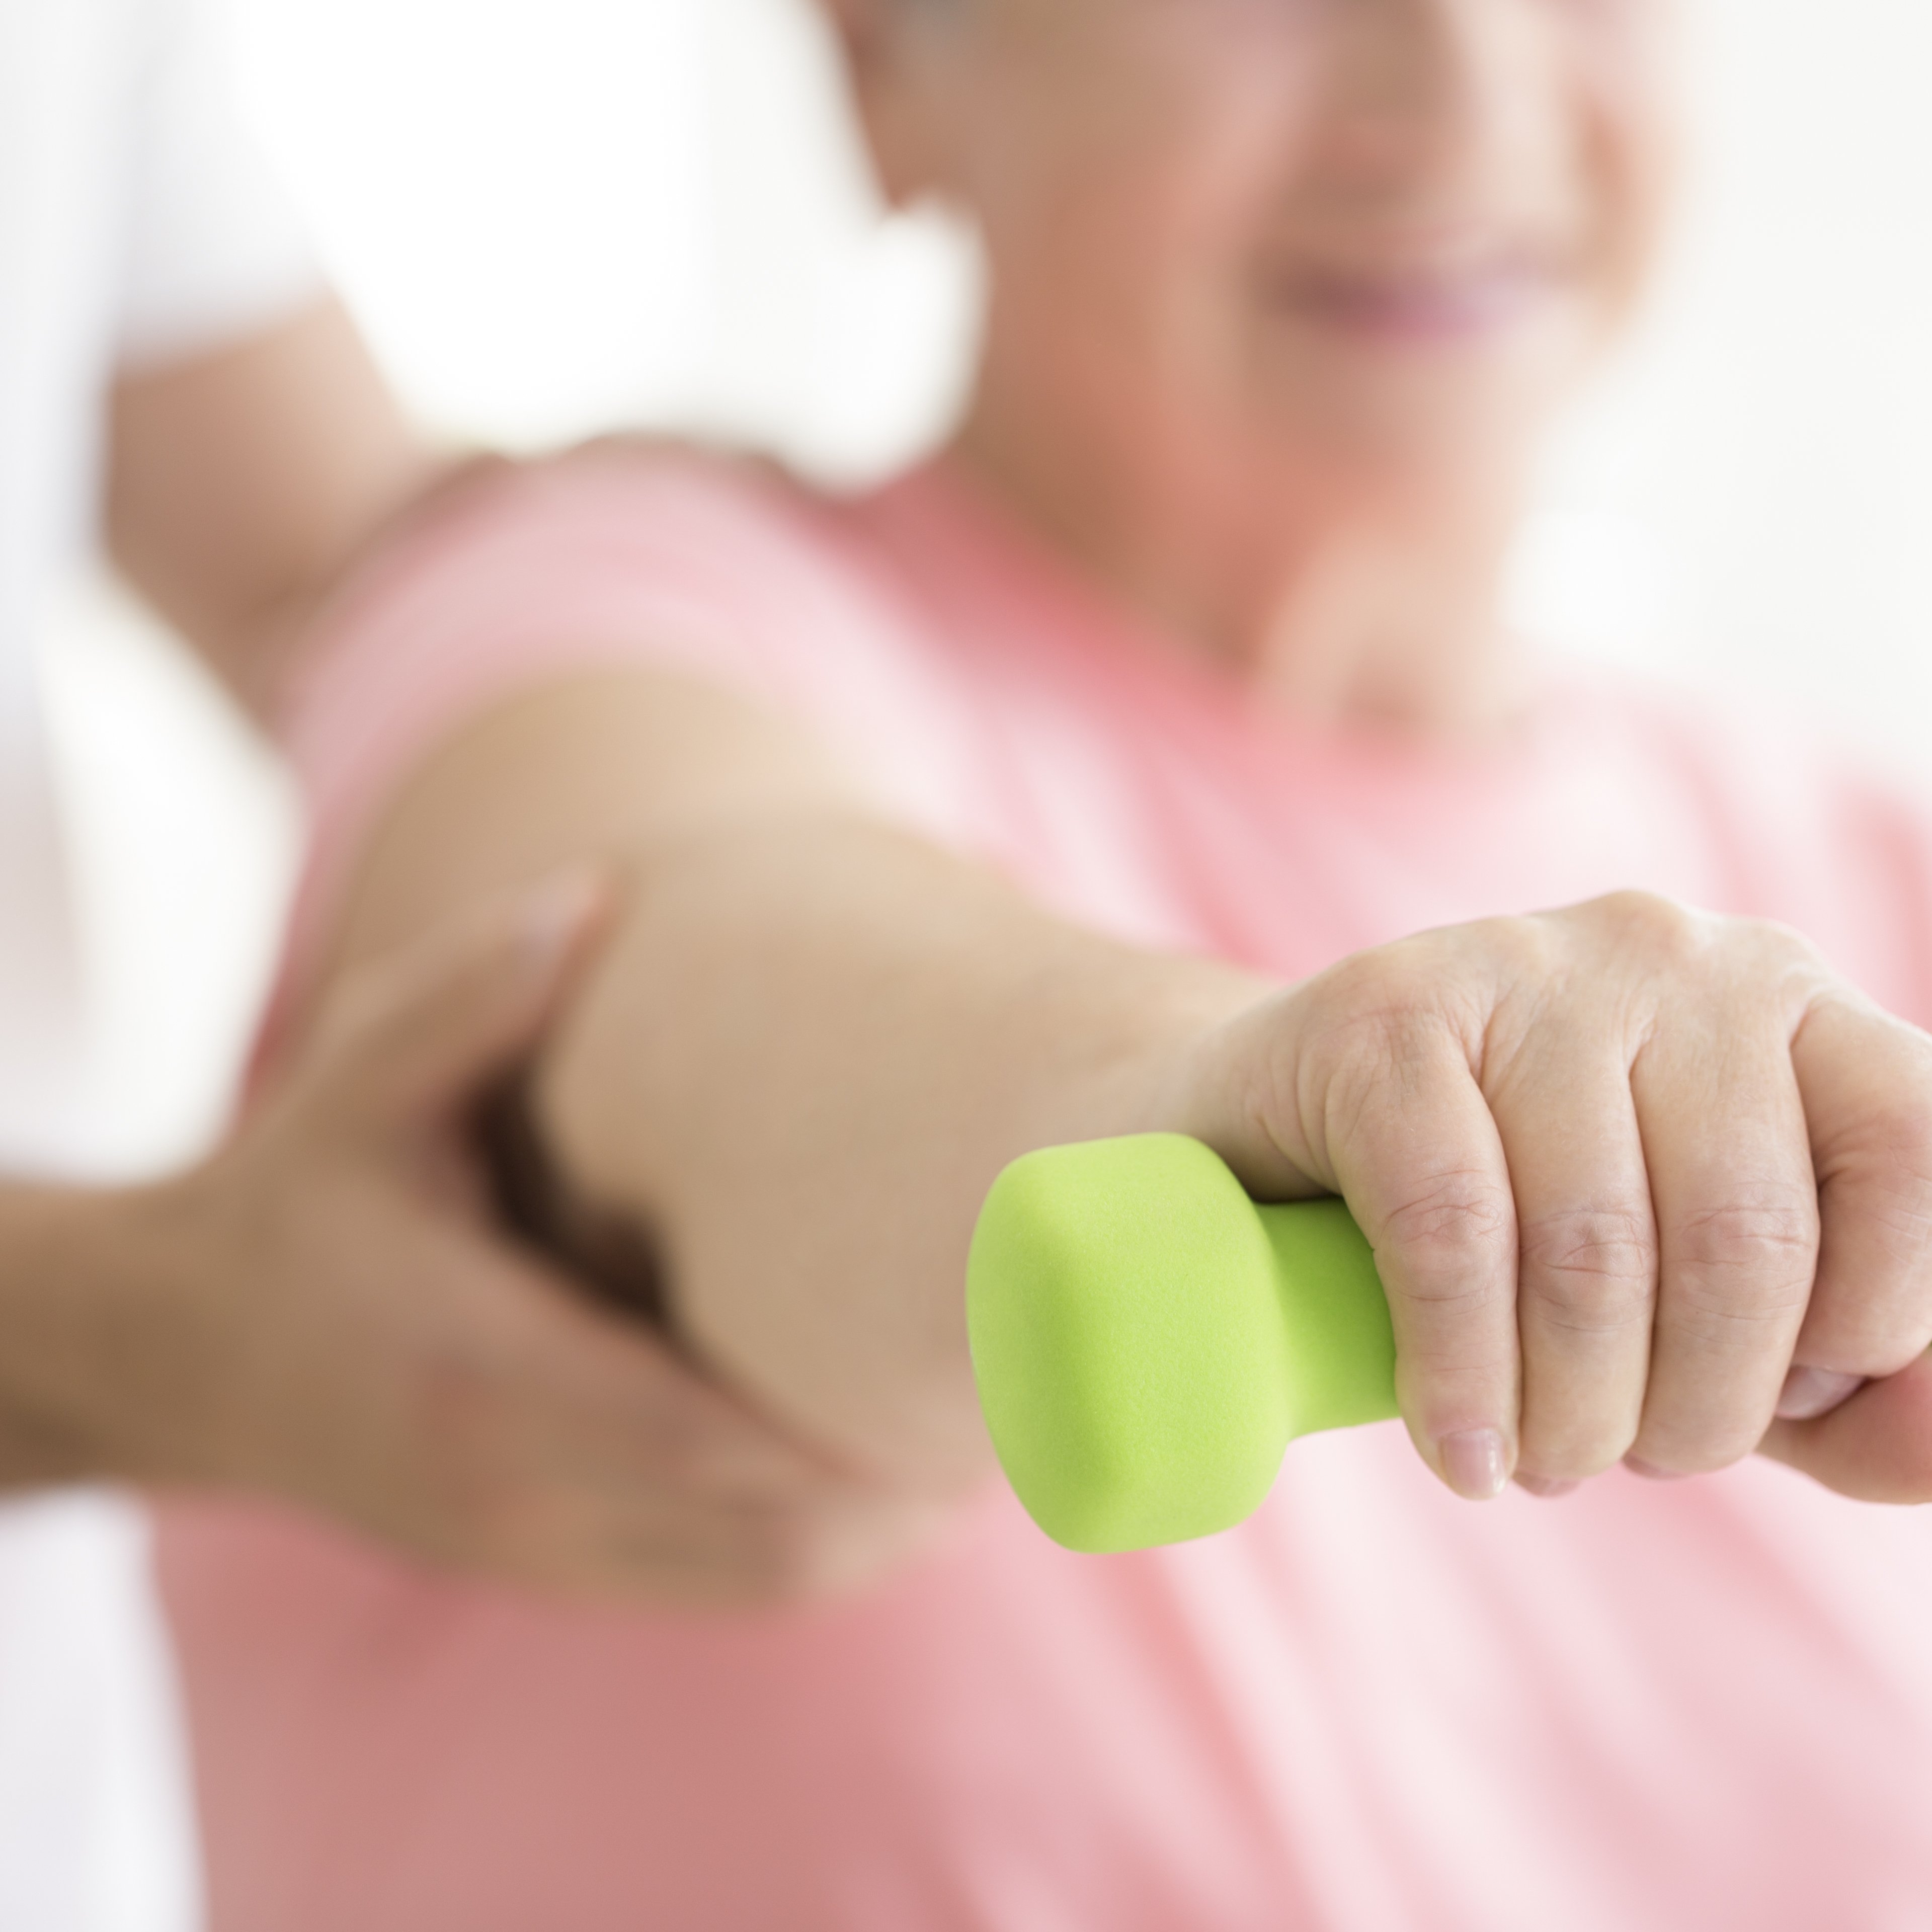 Elderly patient holding a minor dumb-bell in her right hand during isometric physiotherapy